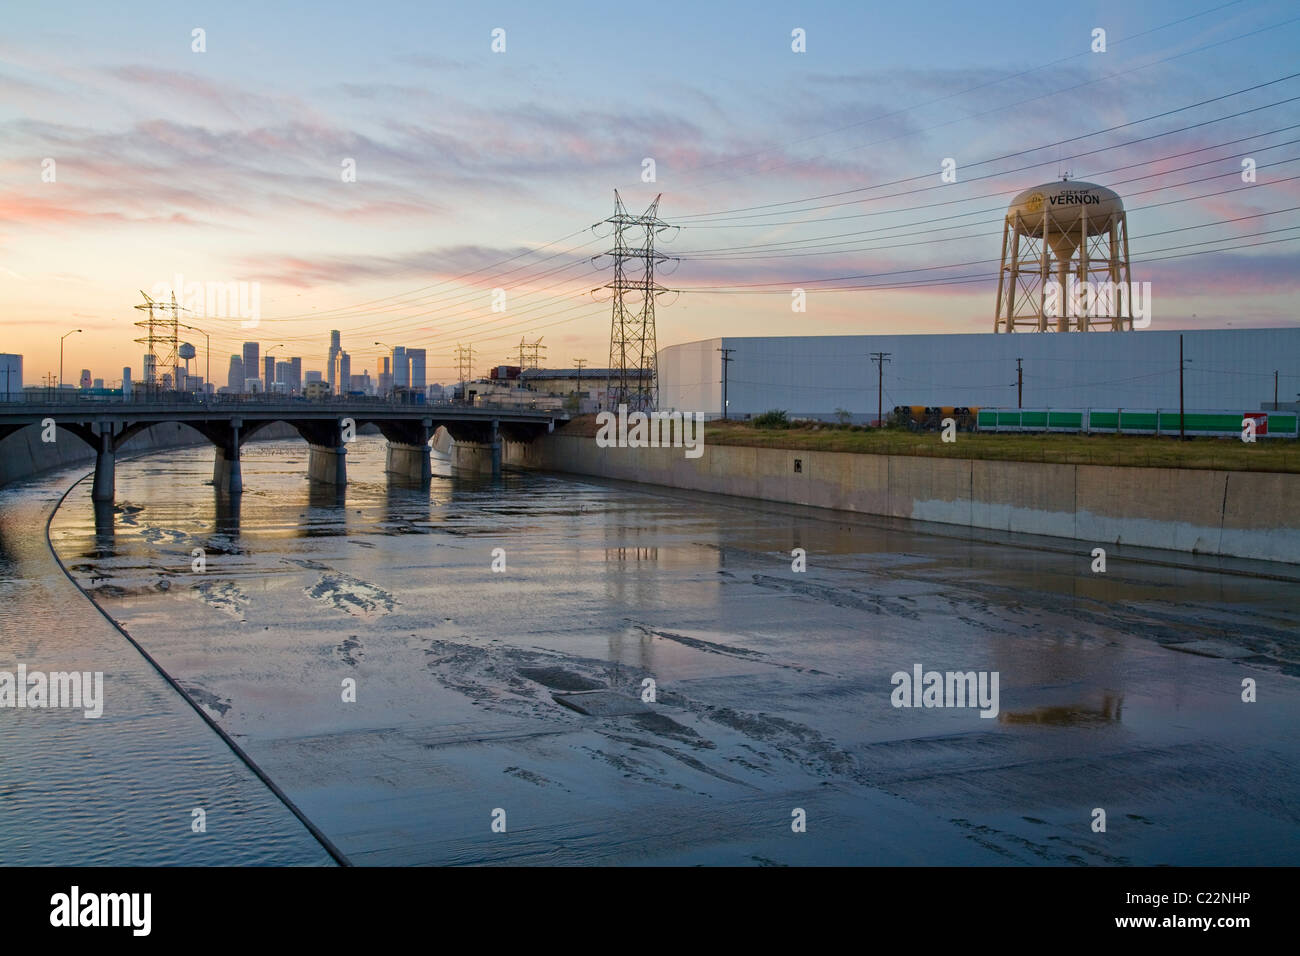 Vernon's Water tower along the Los Angeles River with downtown in the background. Los Angeles, CA Stock Photo